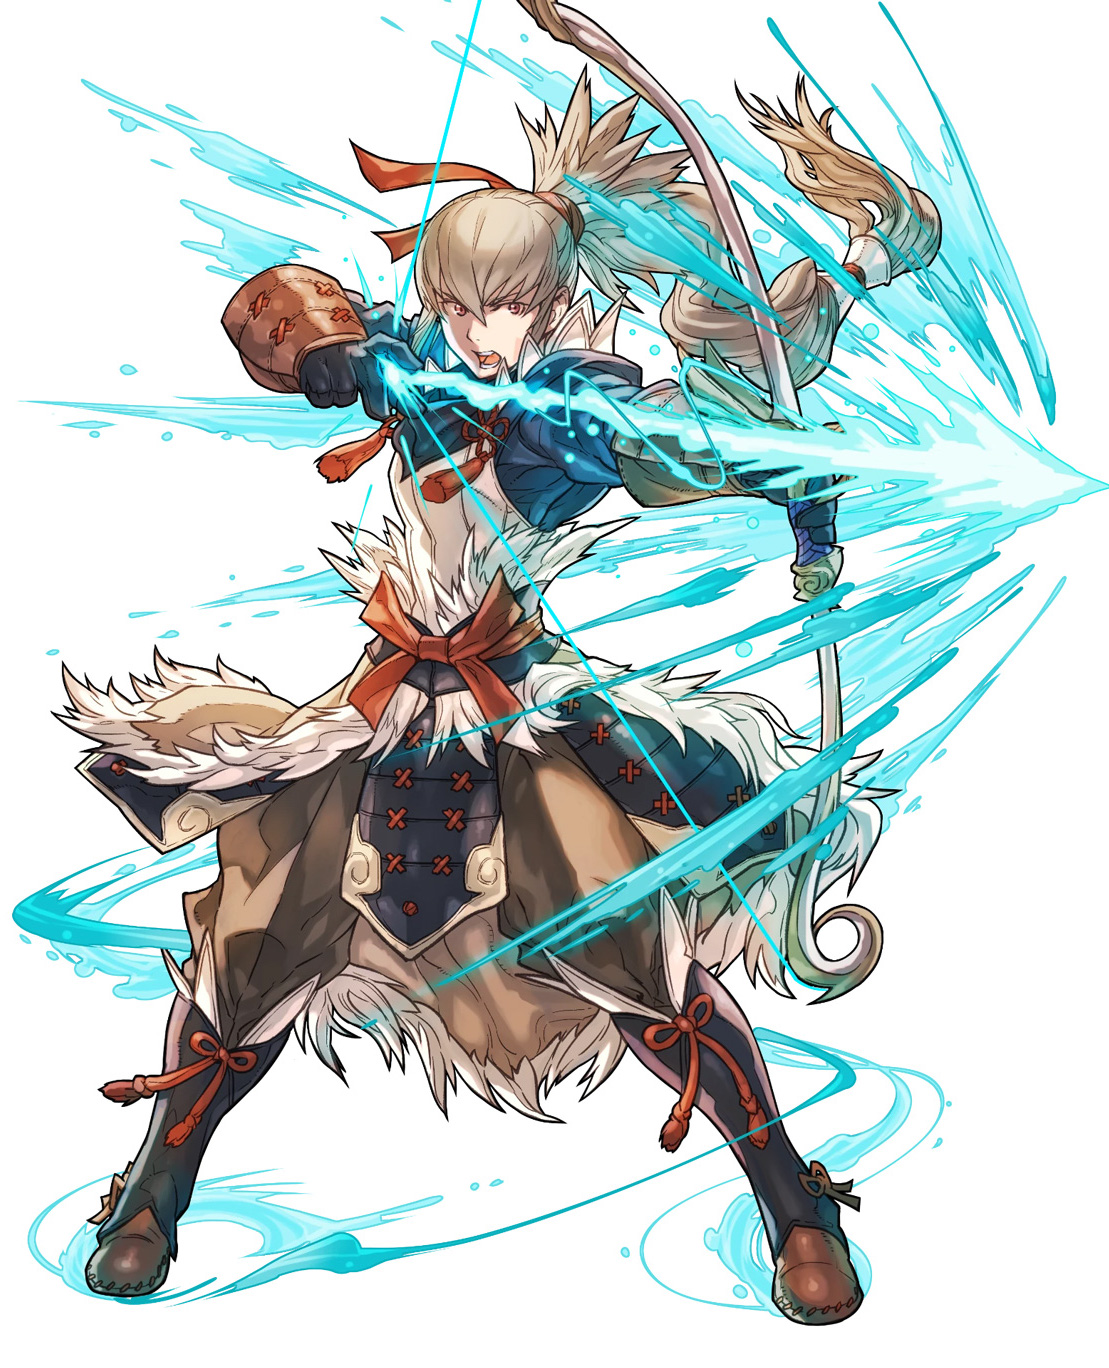 takumi's special attack from fire emblem heroes